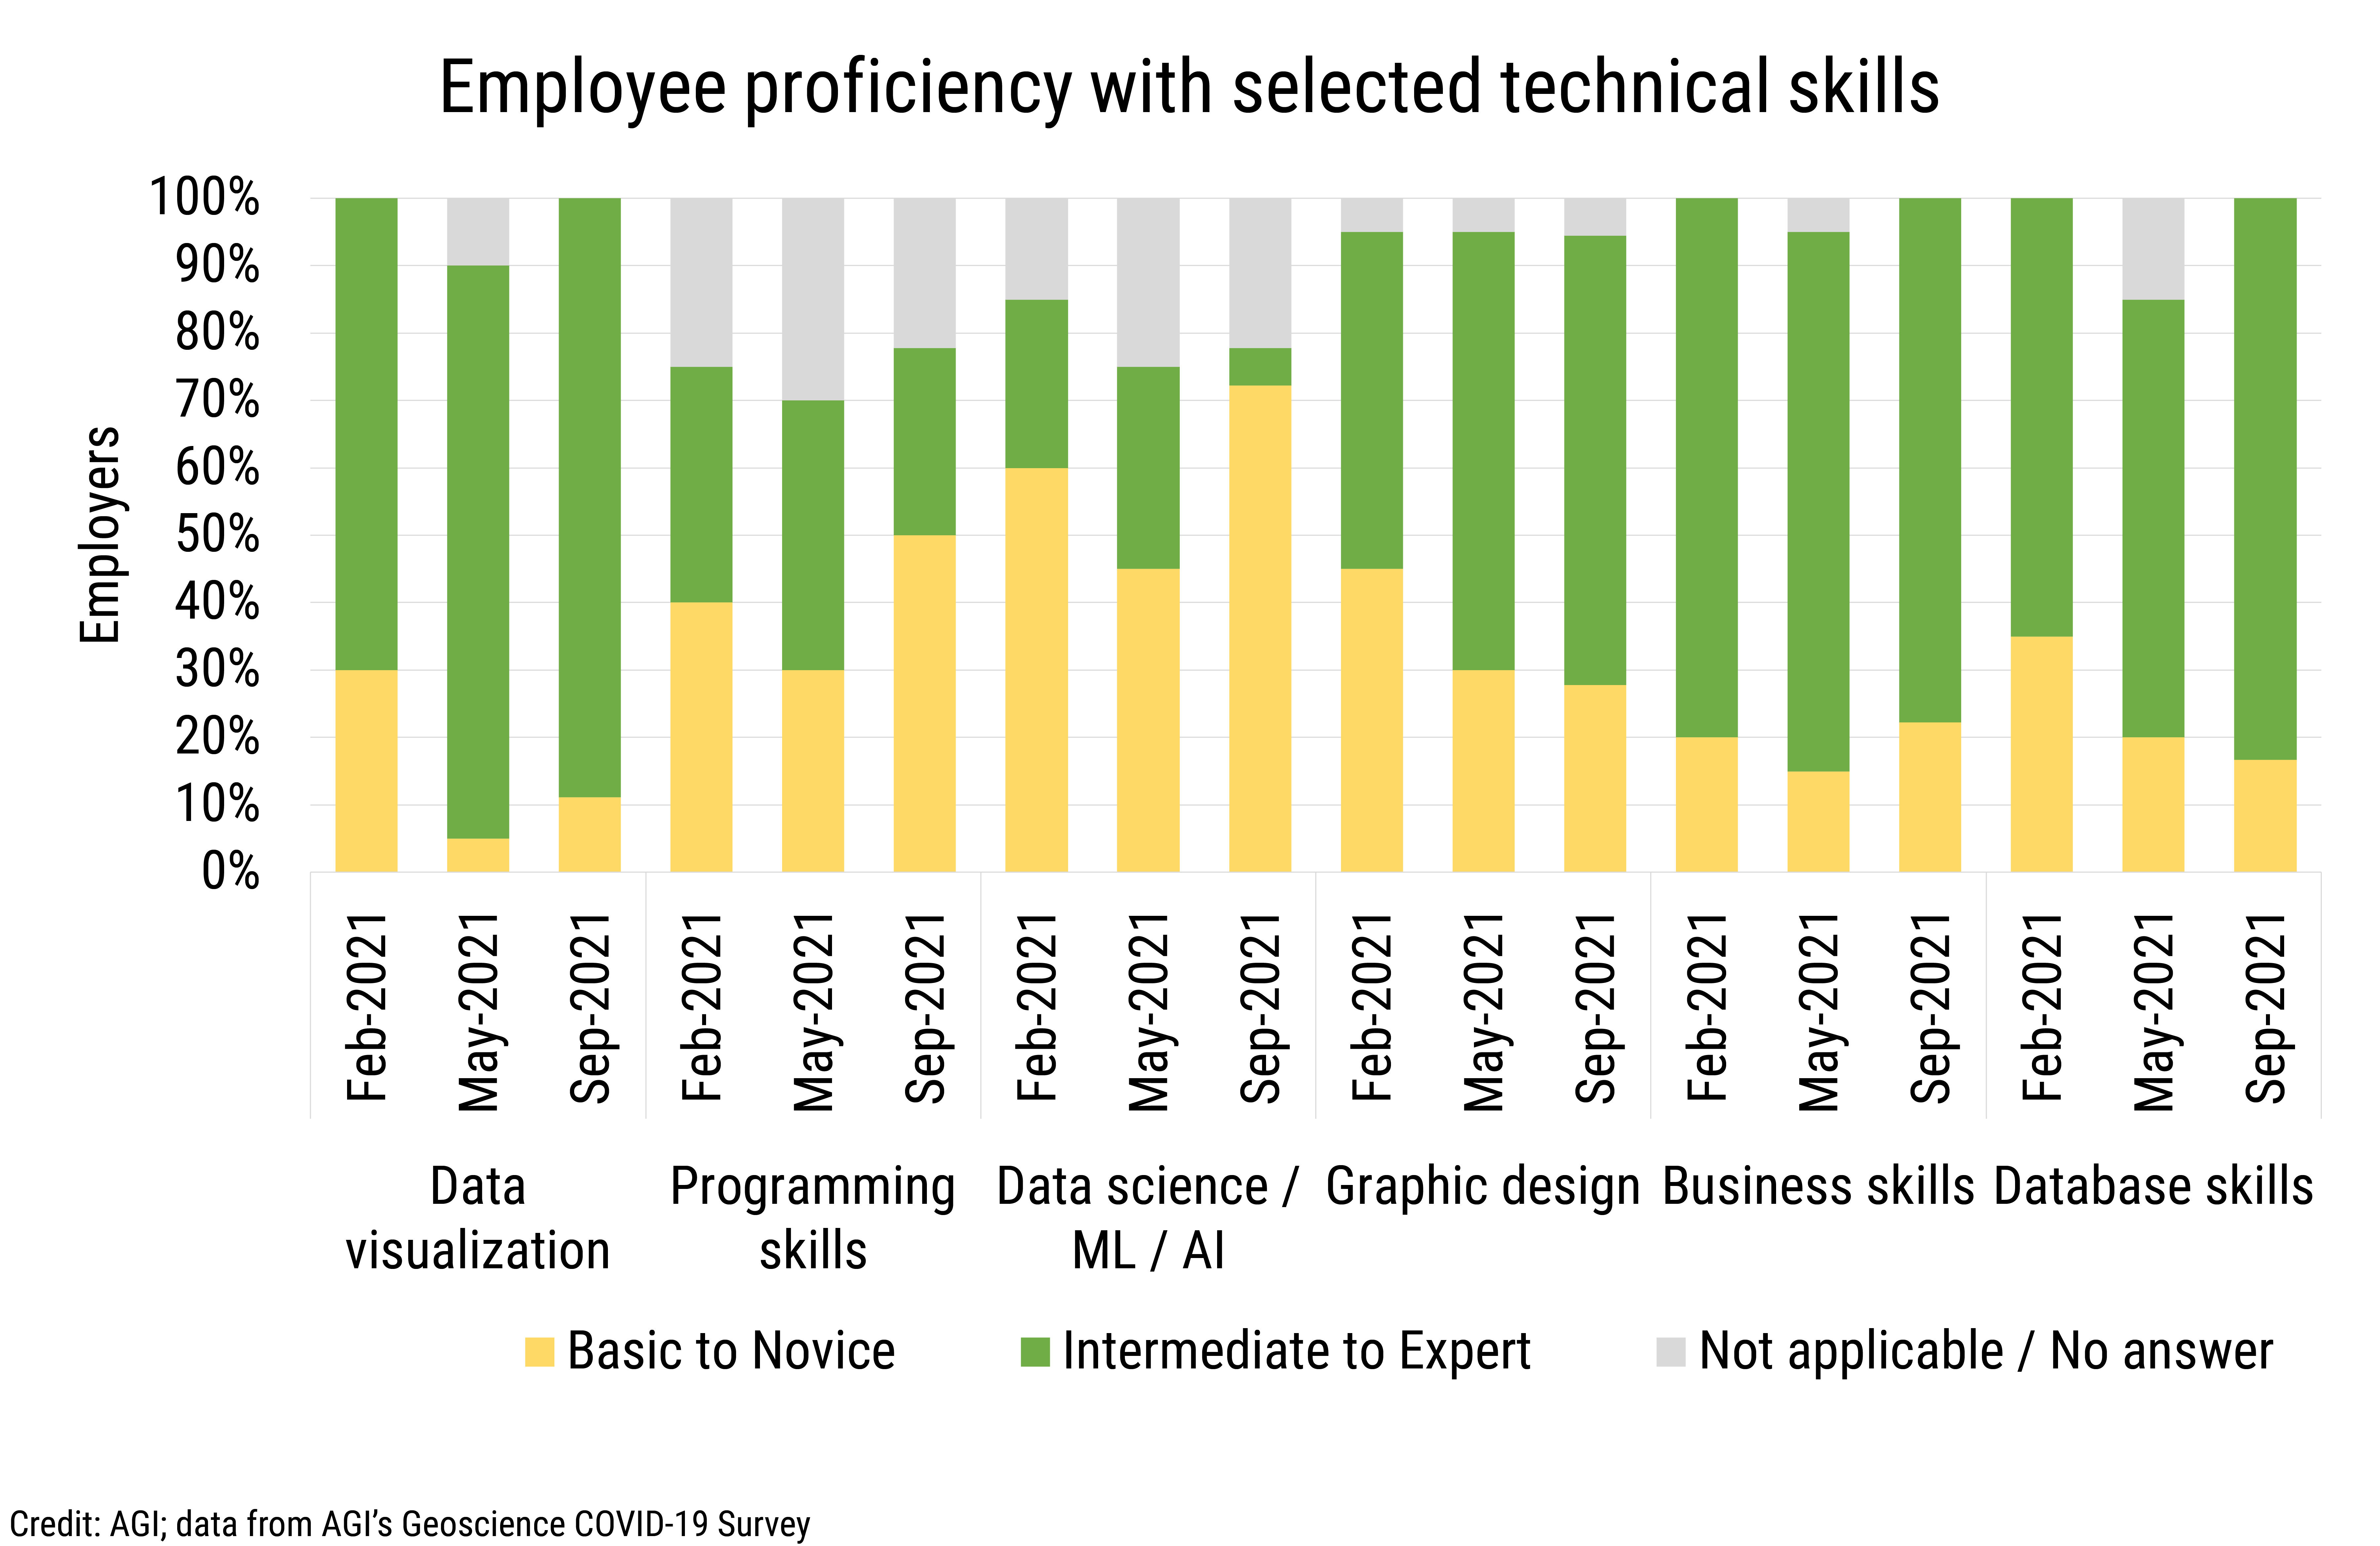 DB_2022-003 chart 15: Employee proficiency with selected technical skills (Credit: AGI; data from AGI's Geoscience COVID-19 Survey)